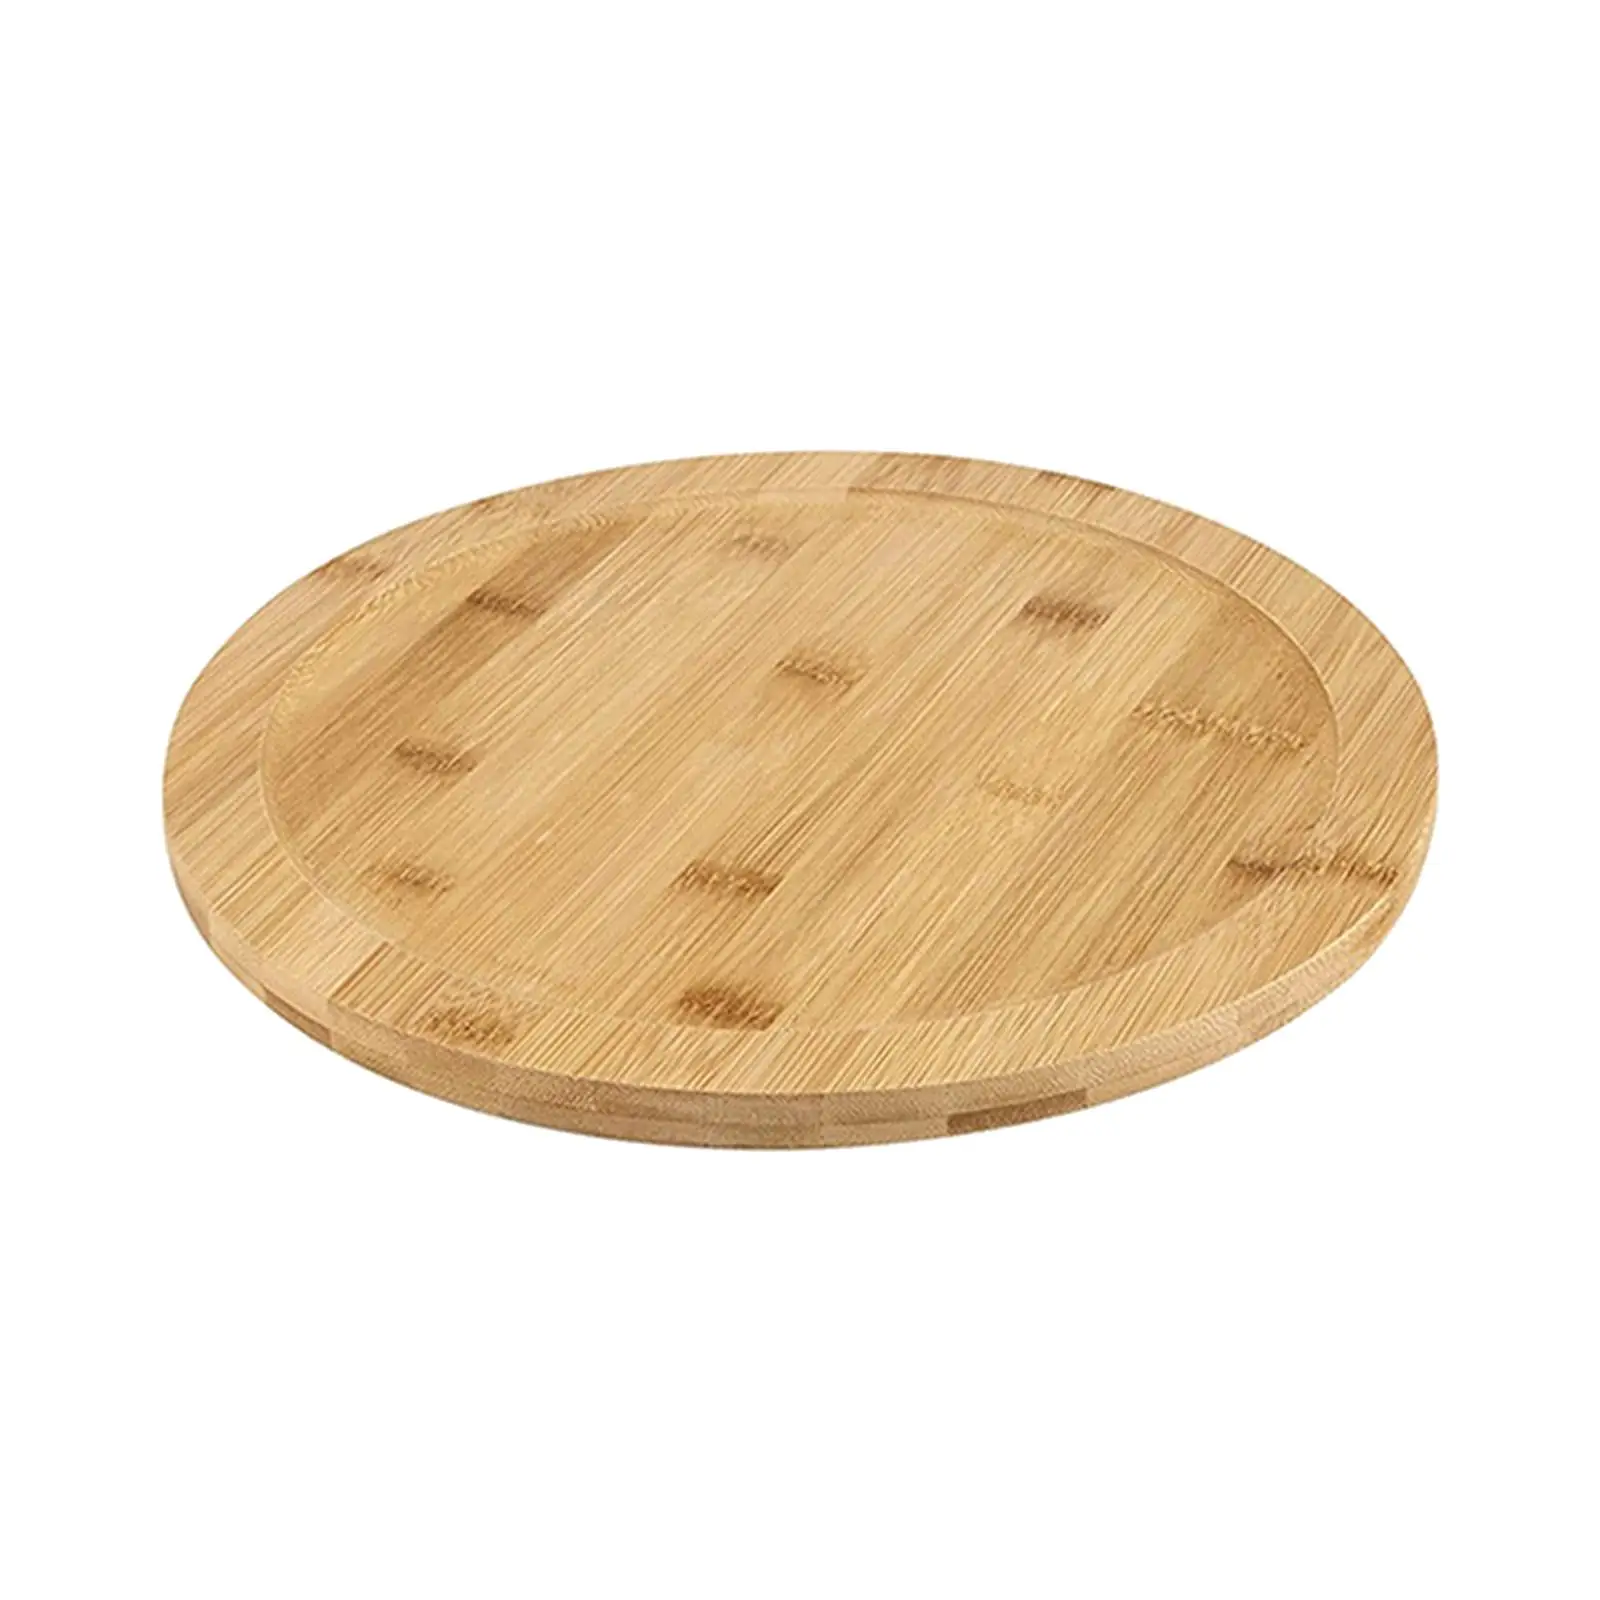 Serving Plate Swivel Plate Cake Stand Wooden Round Rotating Plate for Home Pantry Cabinet Kitchen Countertop Dining Table